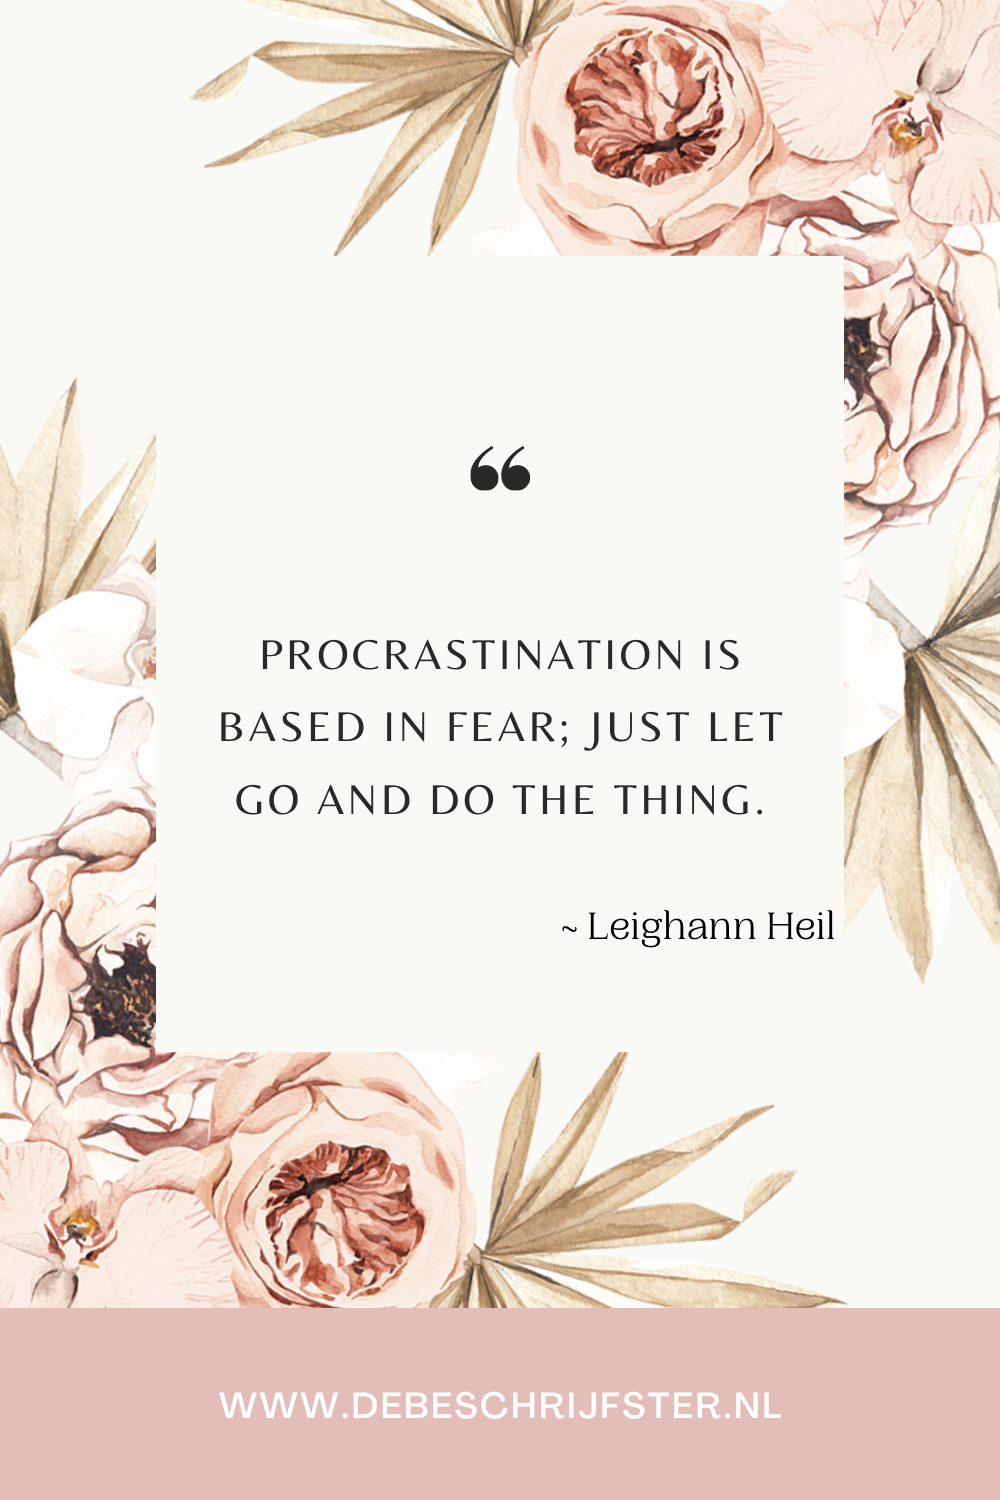 Procrastination is based in fear...just let go and do the thing. Leighann Heil